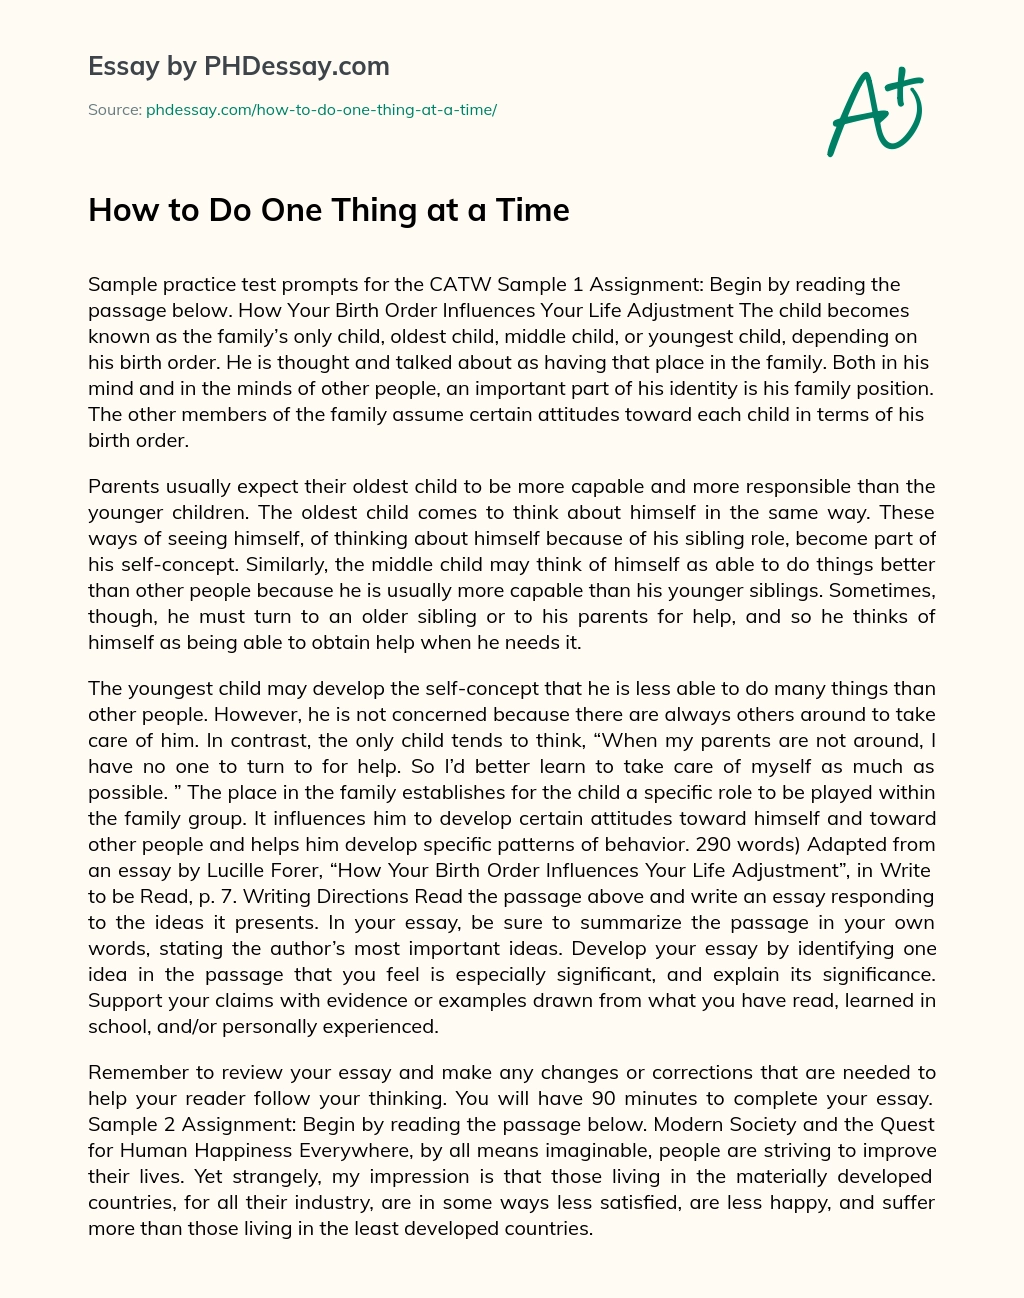 How to Do One Thing at a Time essay